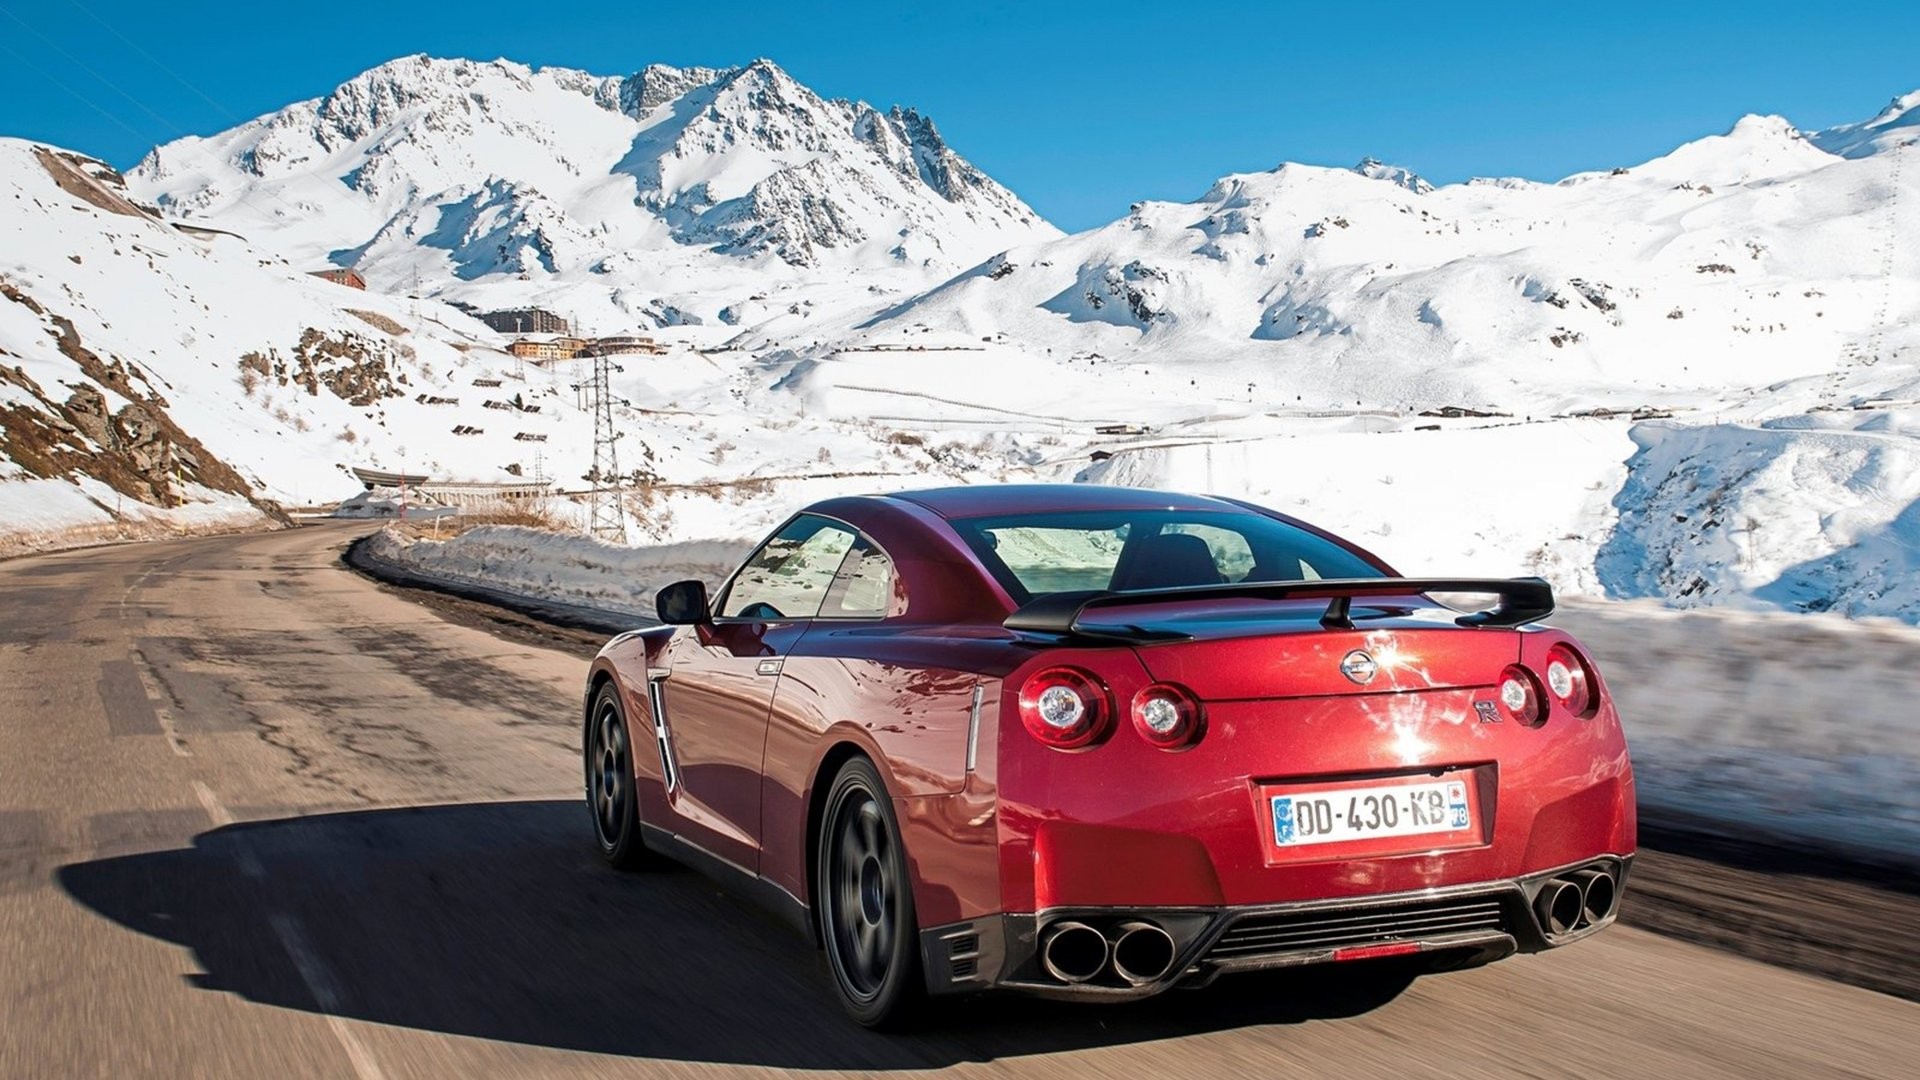 General 1920x1080 Nissan Nissan GT-R winter car road asphalt numbers mountains red cars vehicle Japanese cars